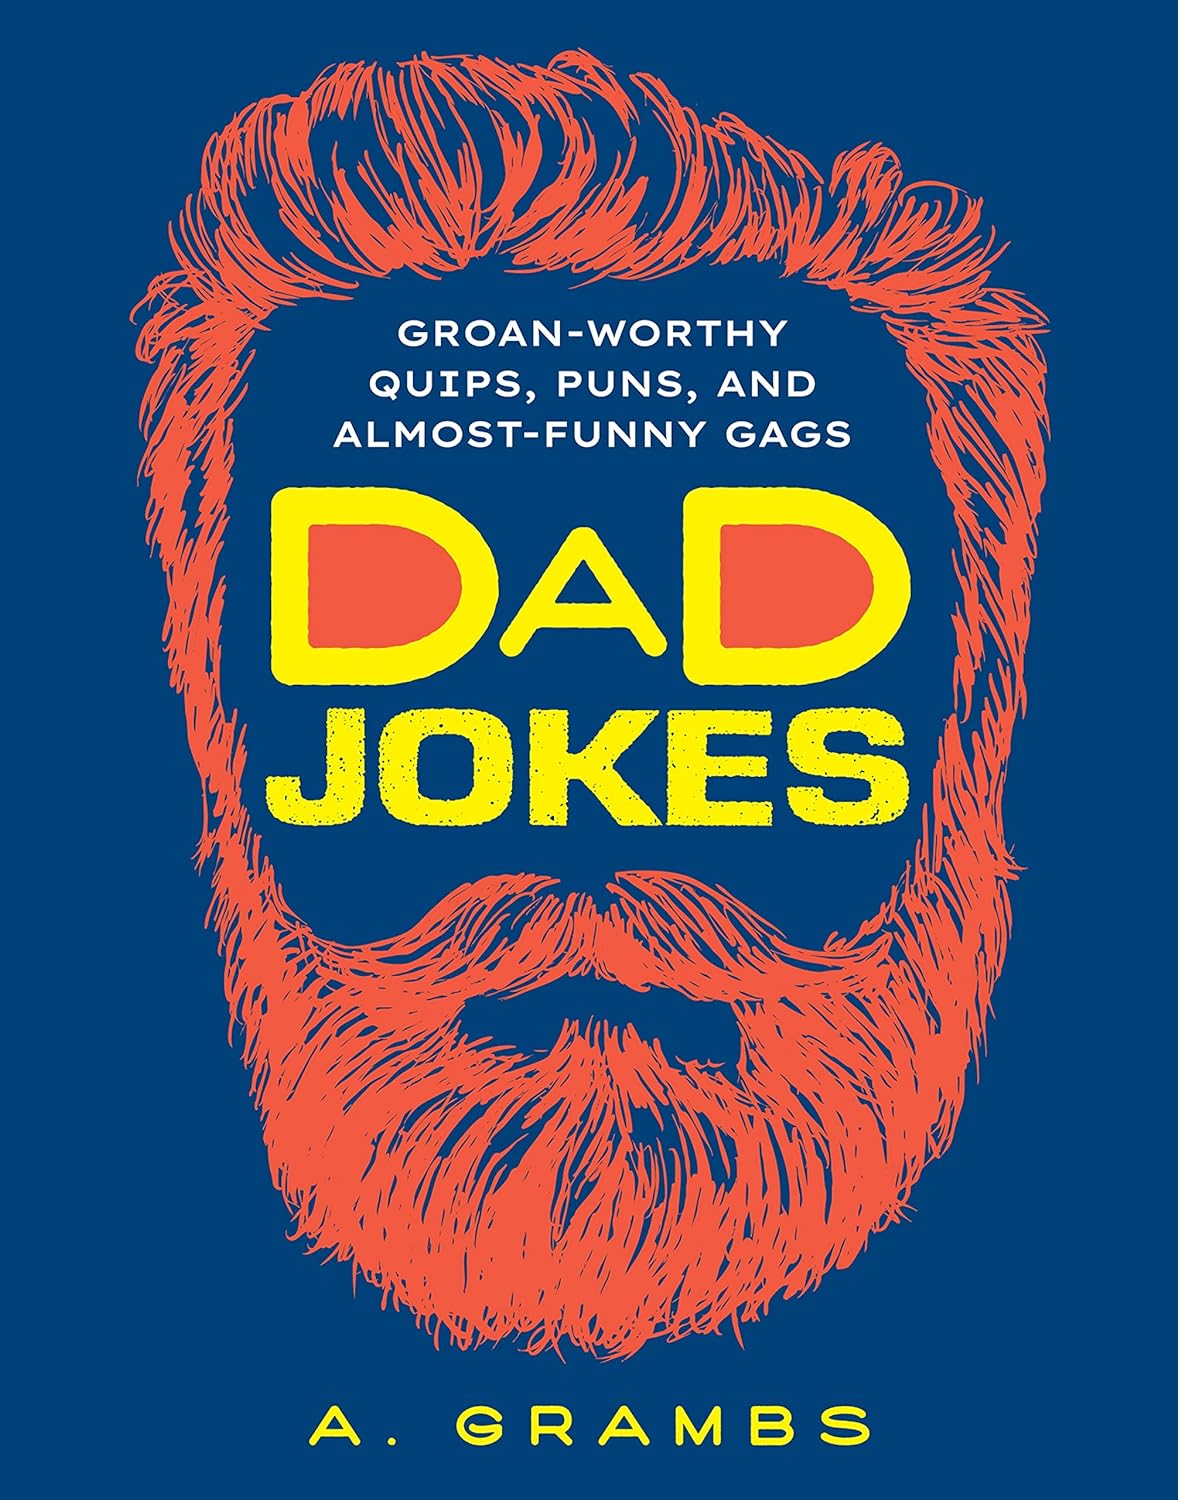 Dad Jokes: Groan-Worthy Quips, Puns, and Almost-Funny Gags - SureShot Books Publishing LLC